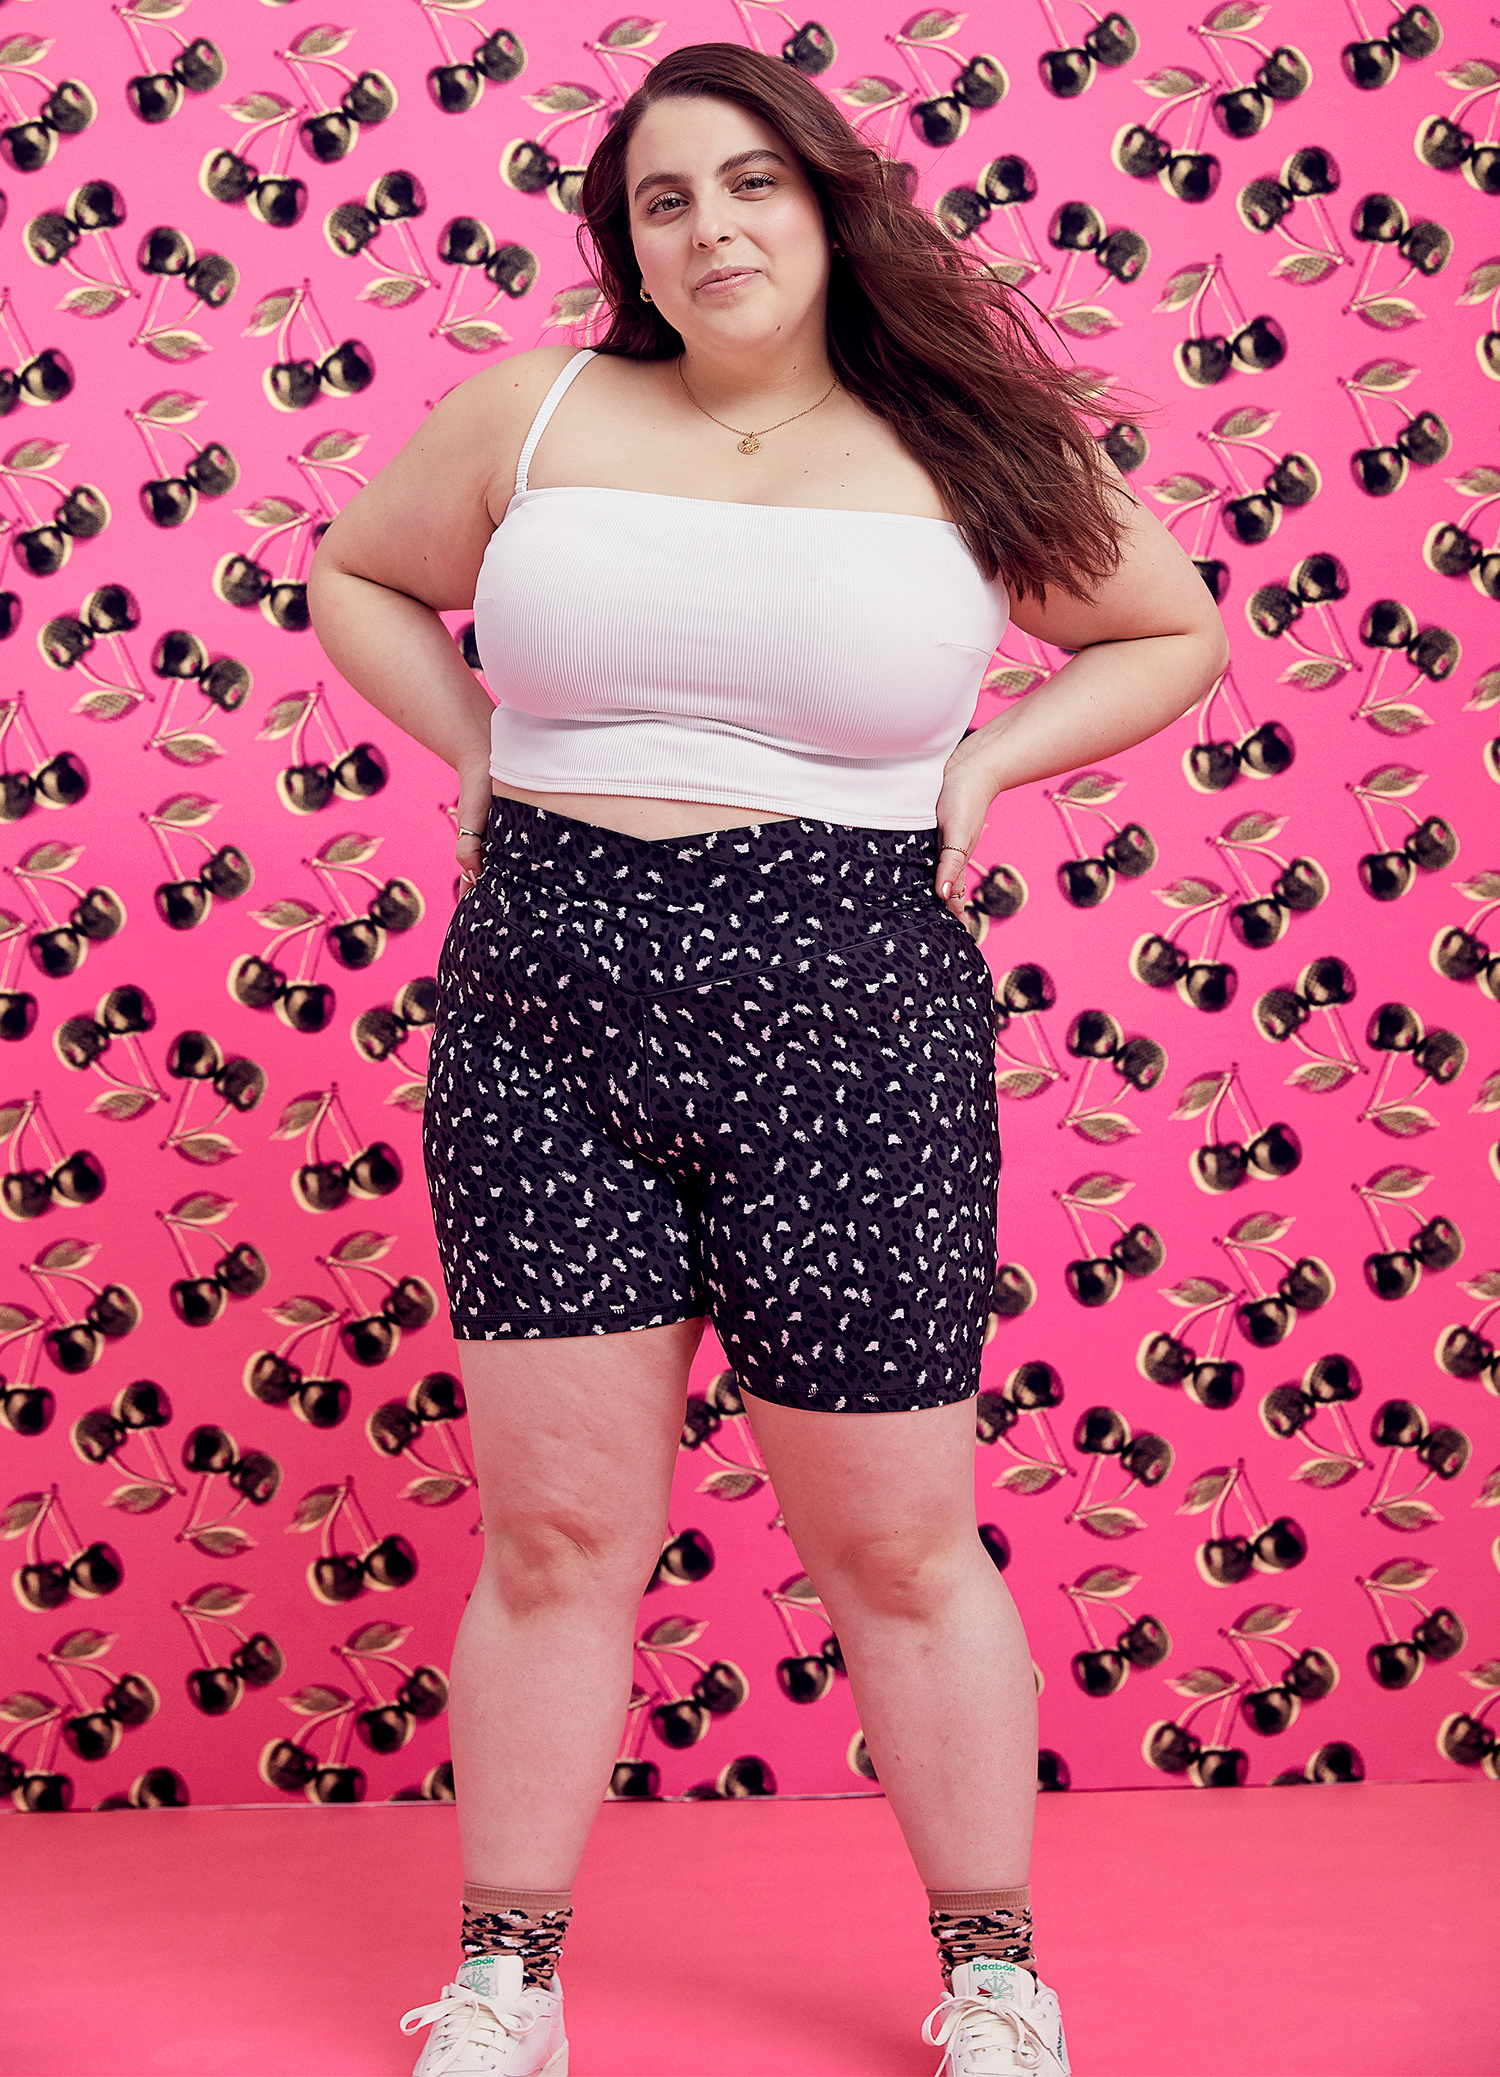 Beanie Feldstein & Lana Condor Become The Newest #AerieREAL Role Models...